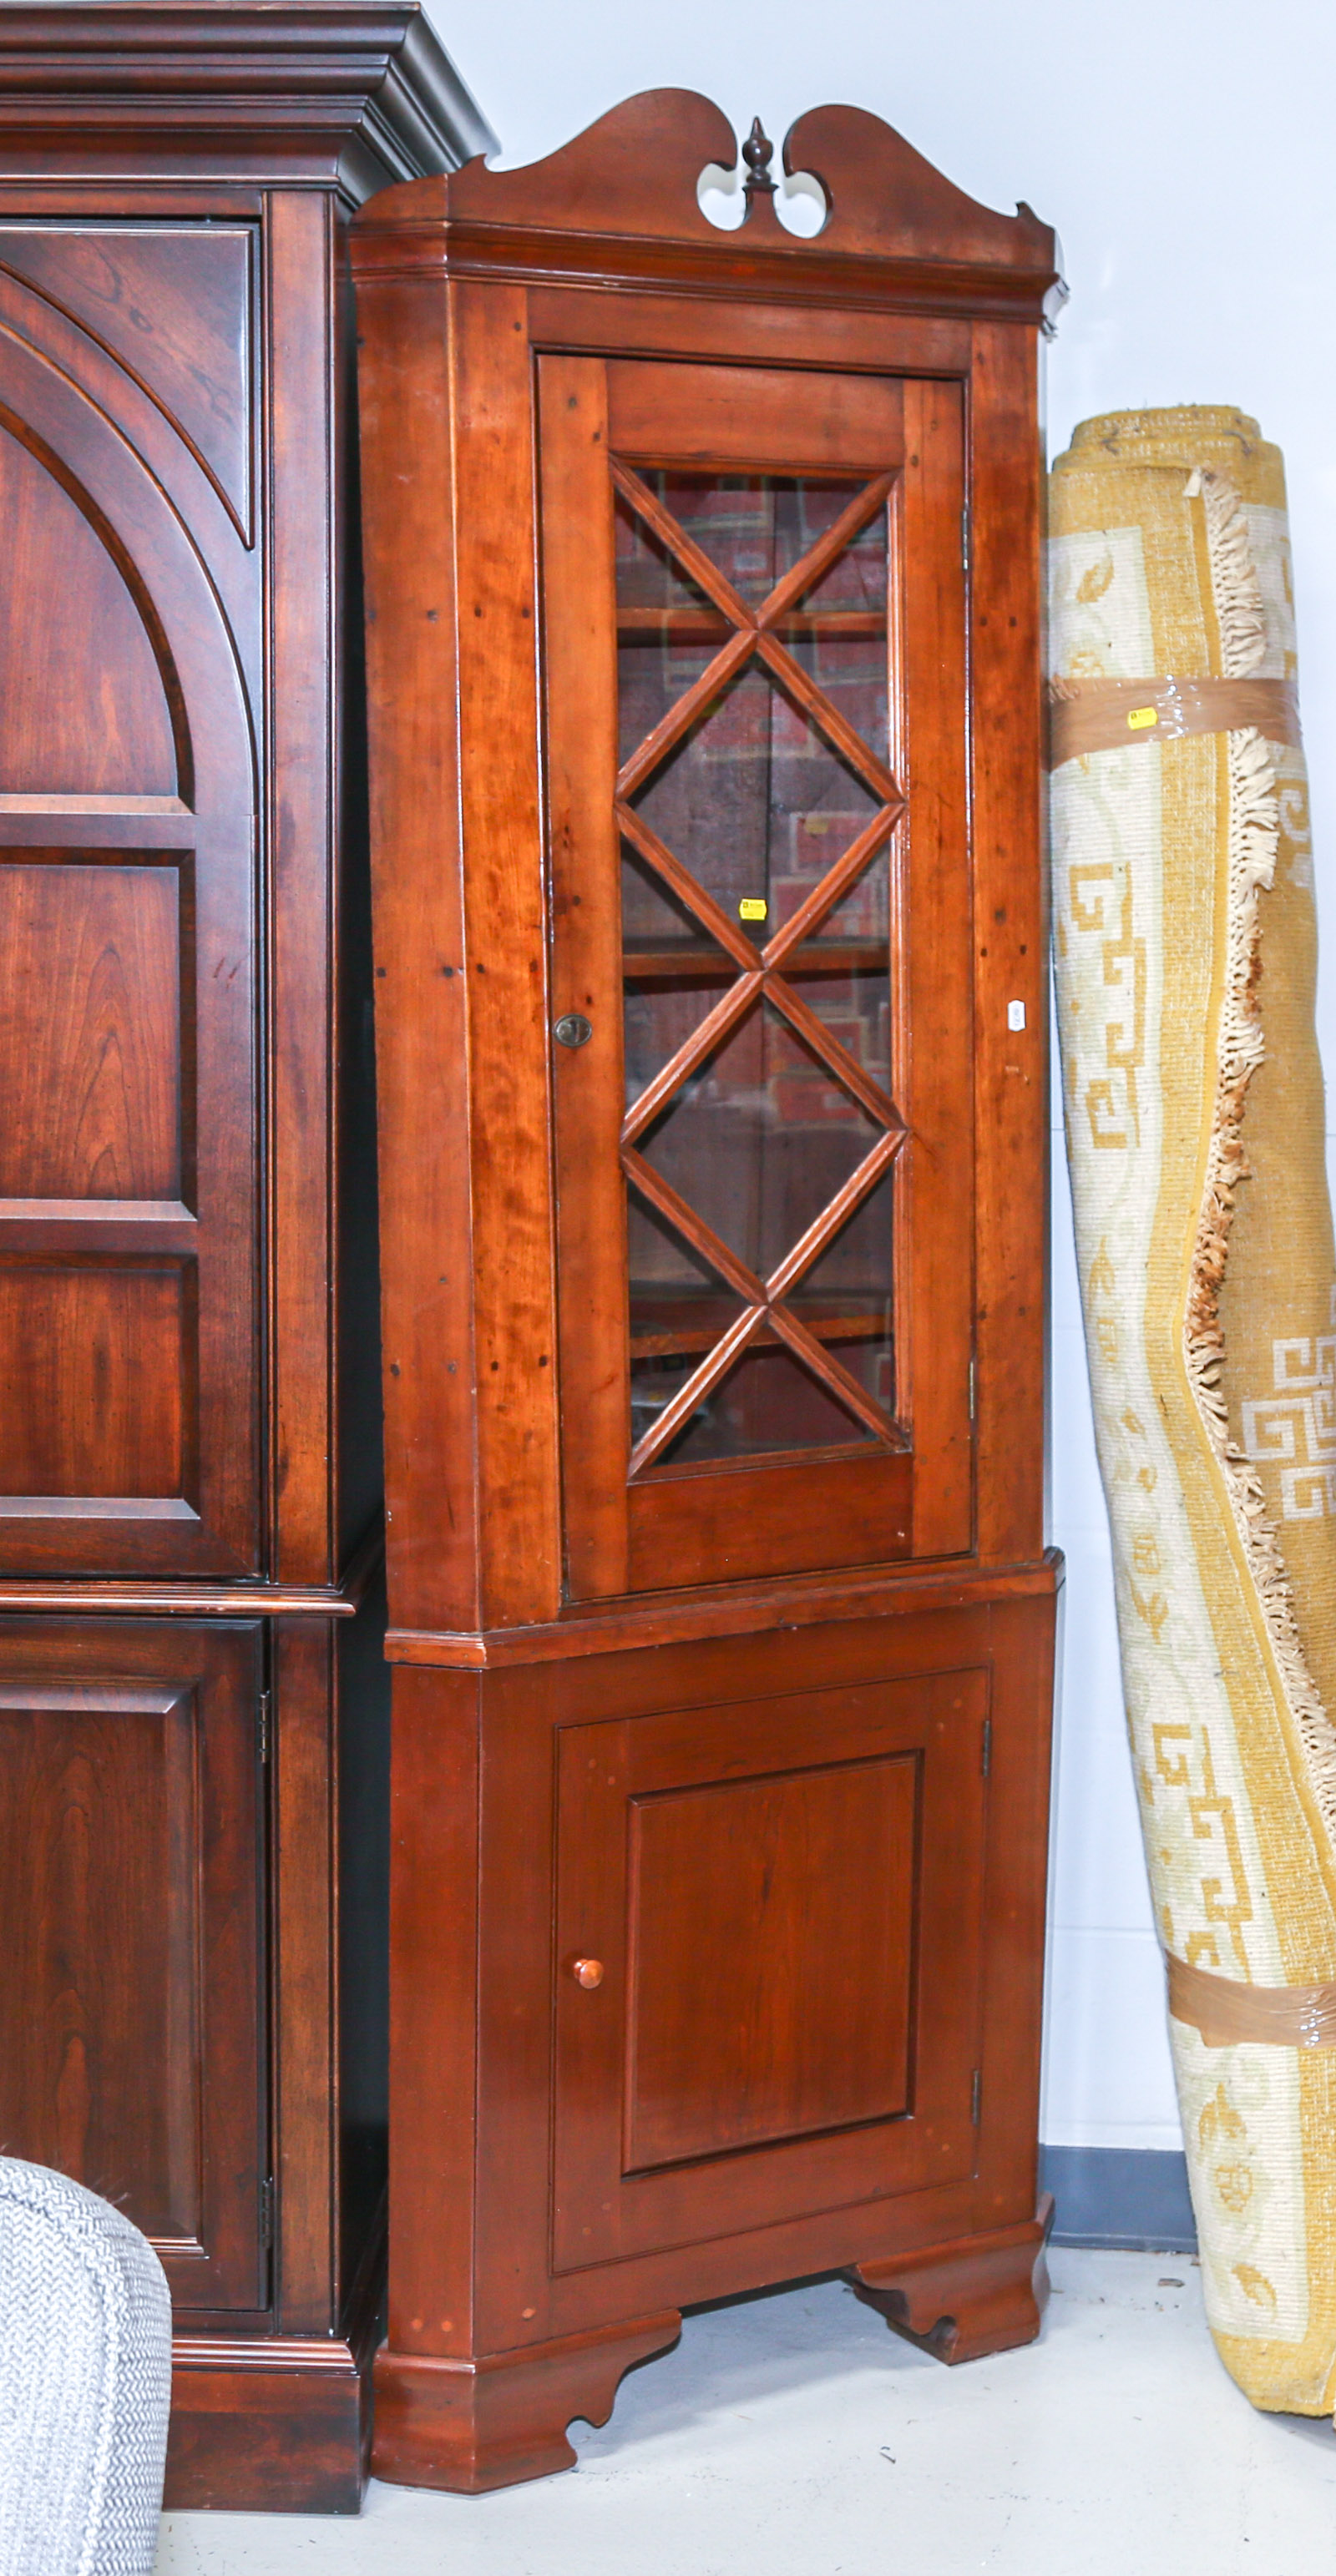 COLONIAL STYLE CHERRY CORNER CUPBOARD